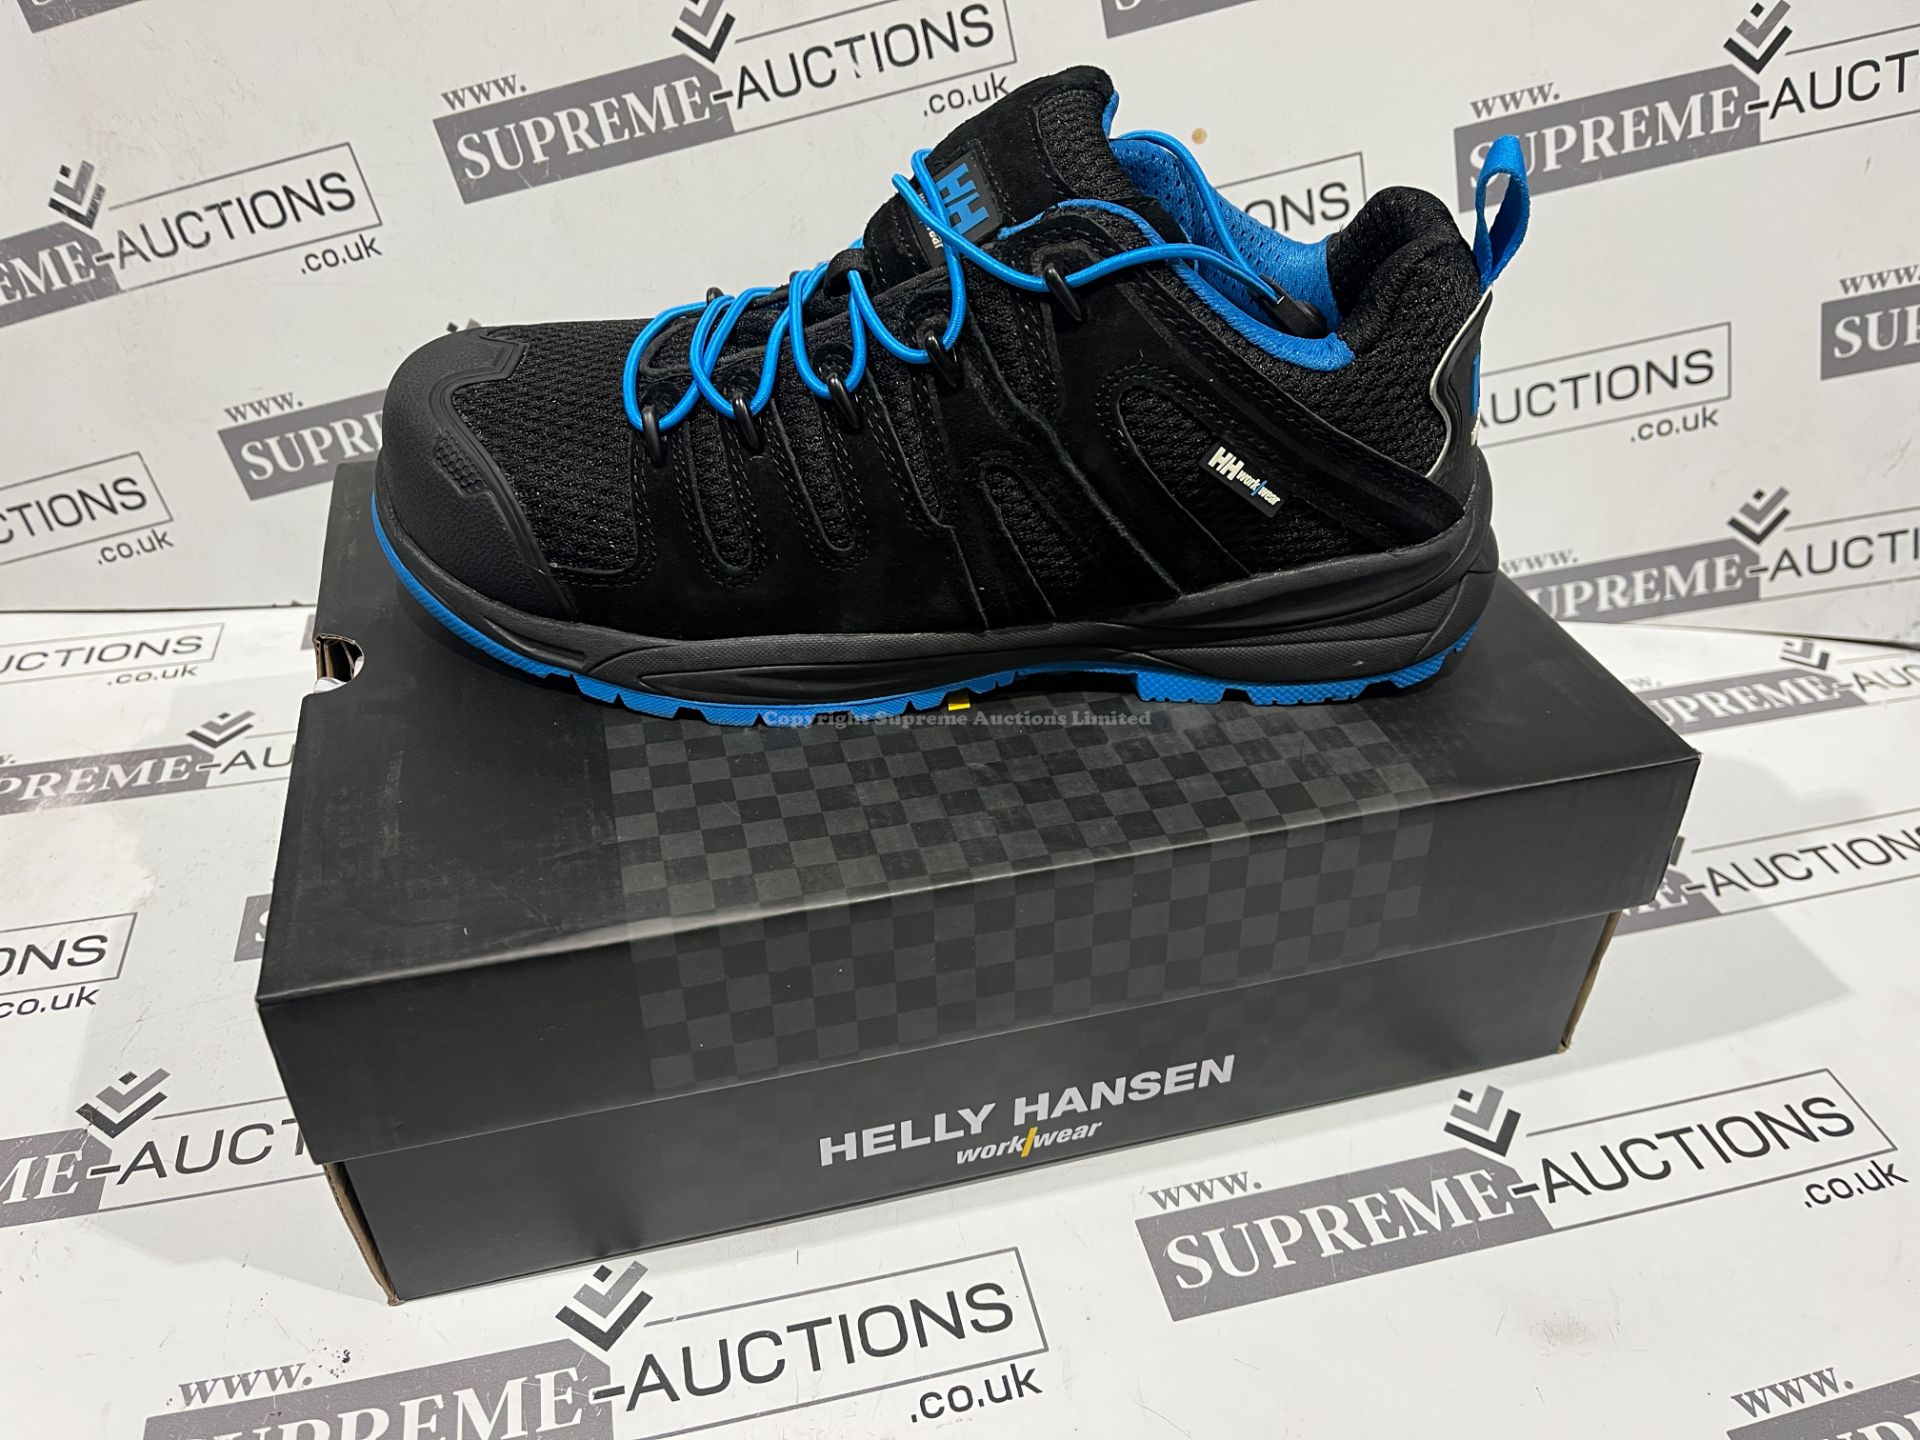 3 X BRAND NEW PAIRS OF HELLY HANSEN FLINT LOW WORK BOOTS SIZE 9.5 R3-2